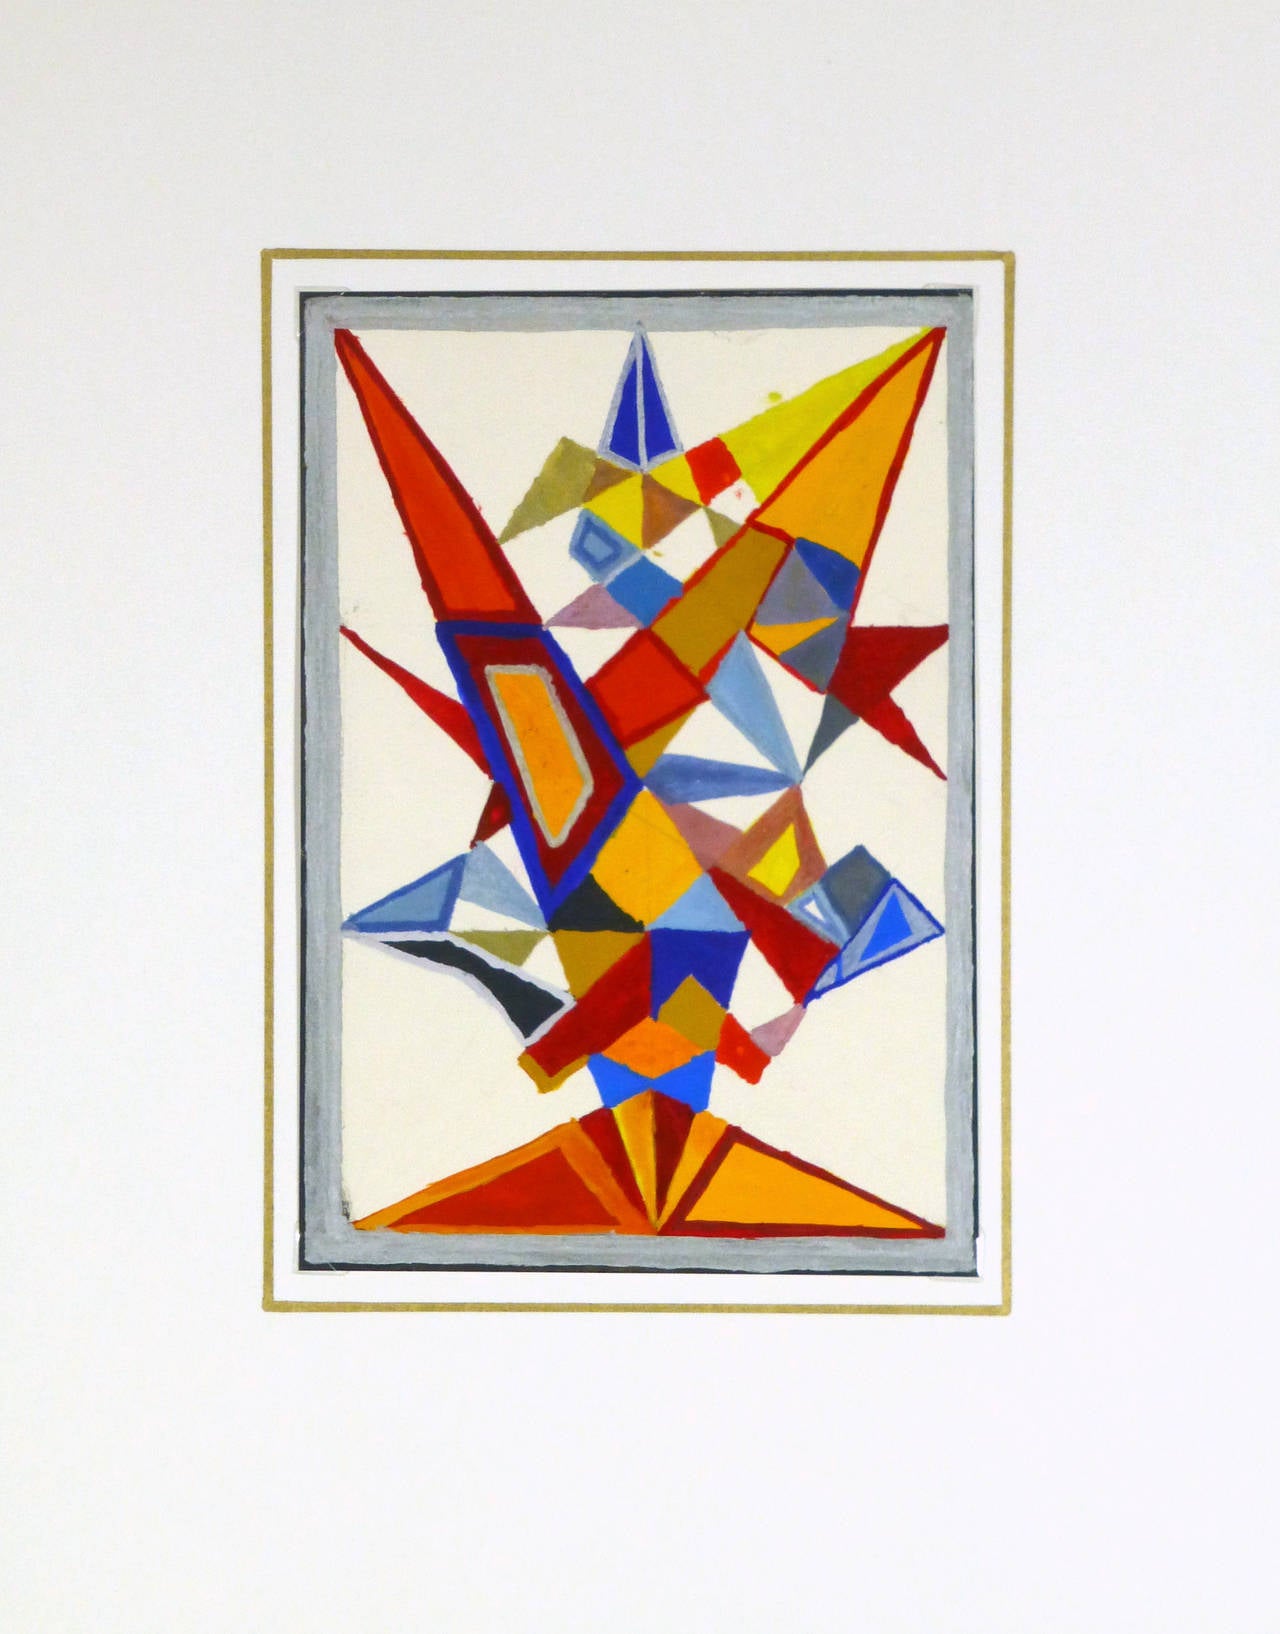 Abstract acrylic painting made up of vivid geometric shapes, circa 1965. Artist unknown.

Original one-of-a-kind vintage work of art on paper displayed on a white mat with a gold border. Mat fits a standard-size frame. Archival plastic sleeve and